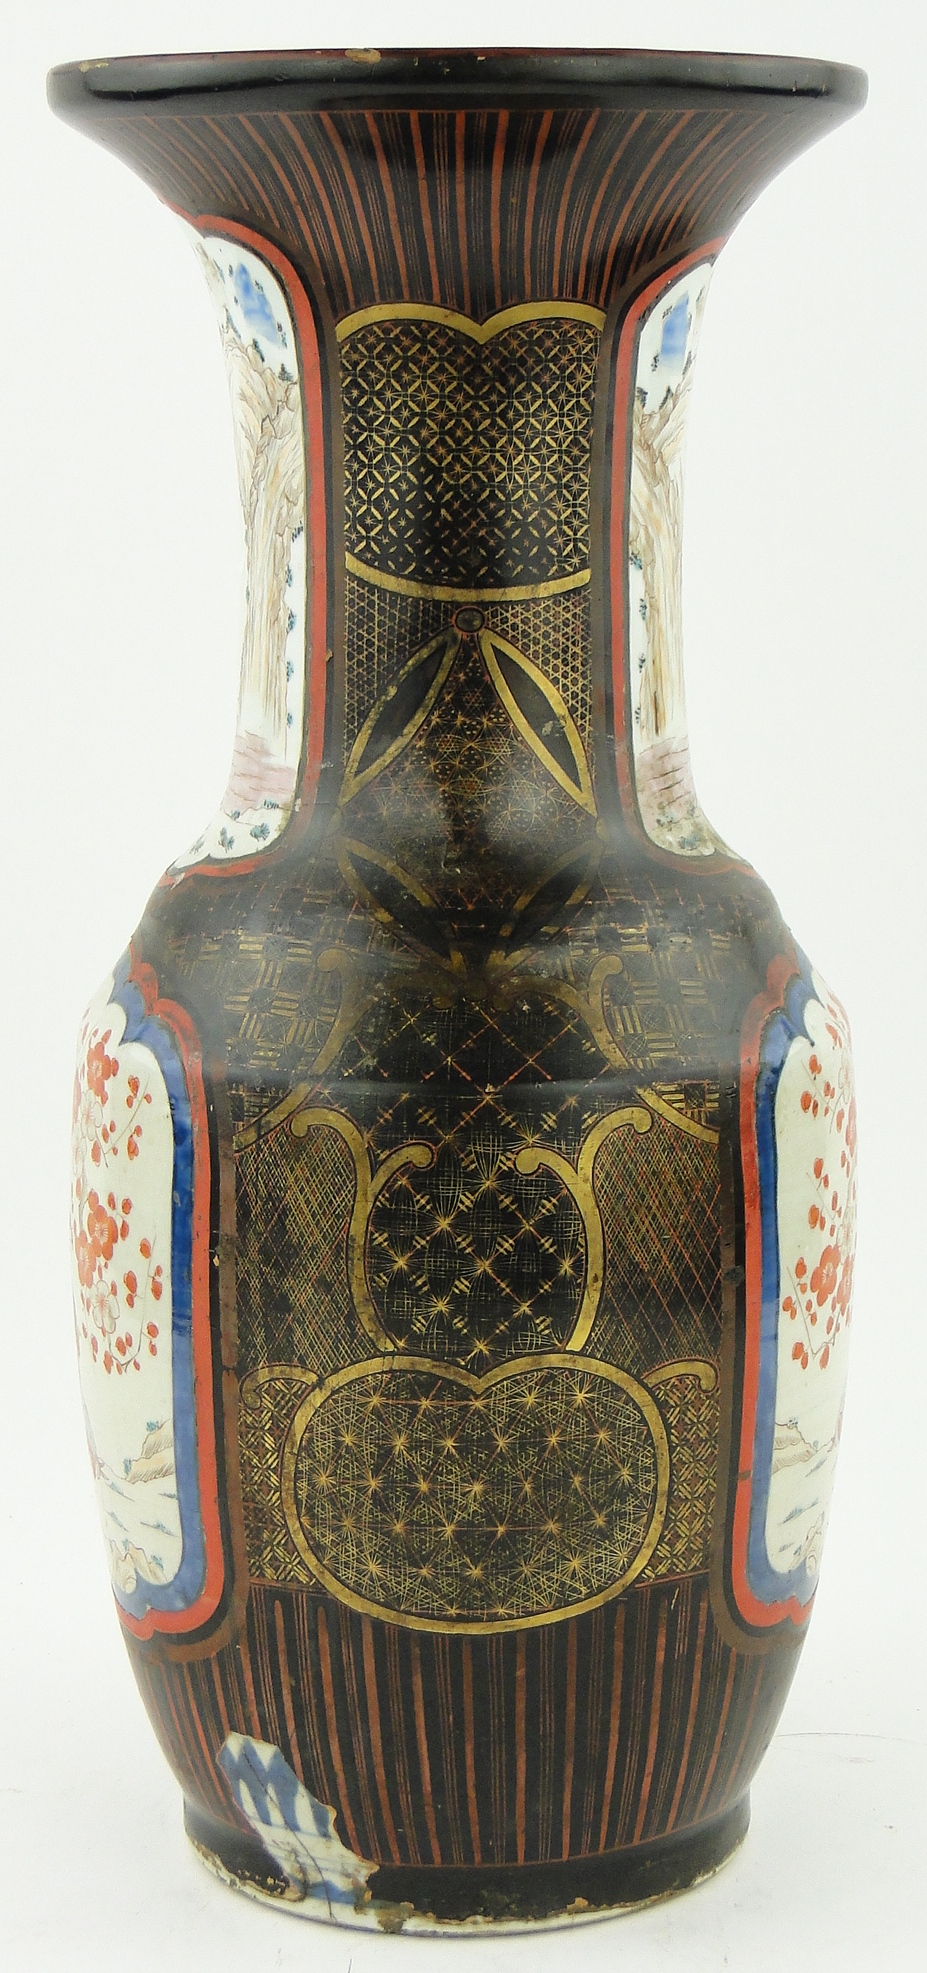 18/19th century Chinese vase
with lacquer and hatch gilded ground covering blue and white - Image 2 of 10